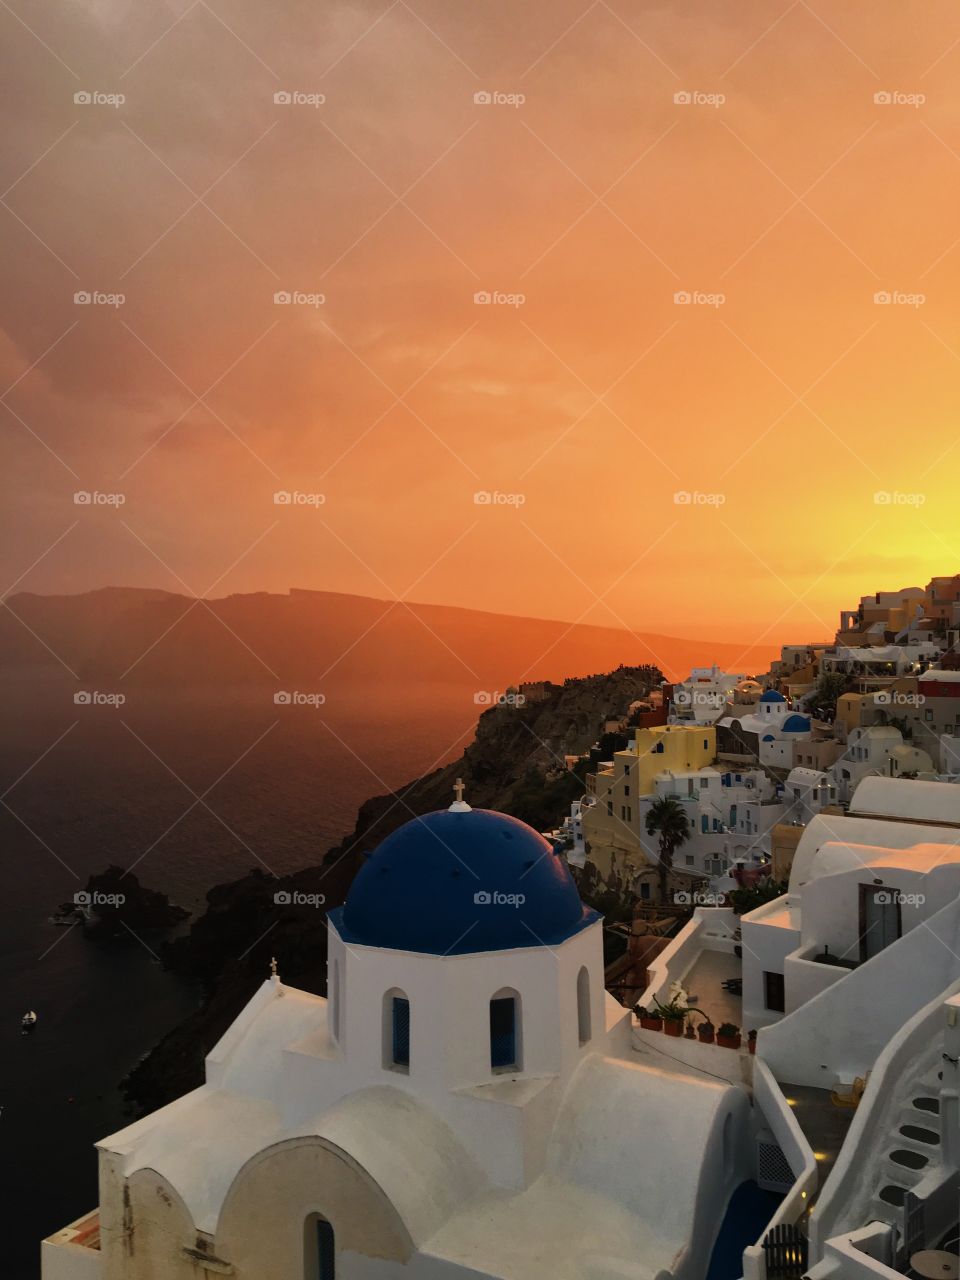 Sunset in Santorini, Greece!!!! The most beautiful sunset I’ve ever seen in my life! 